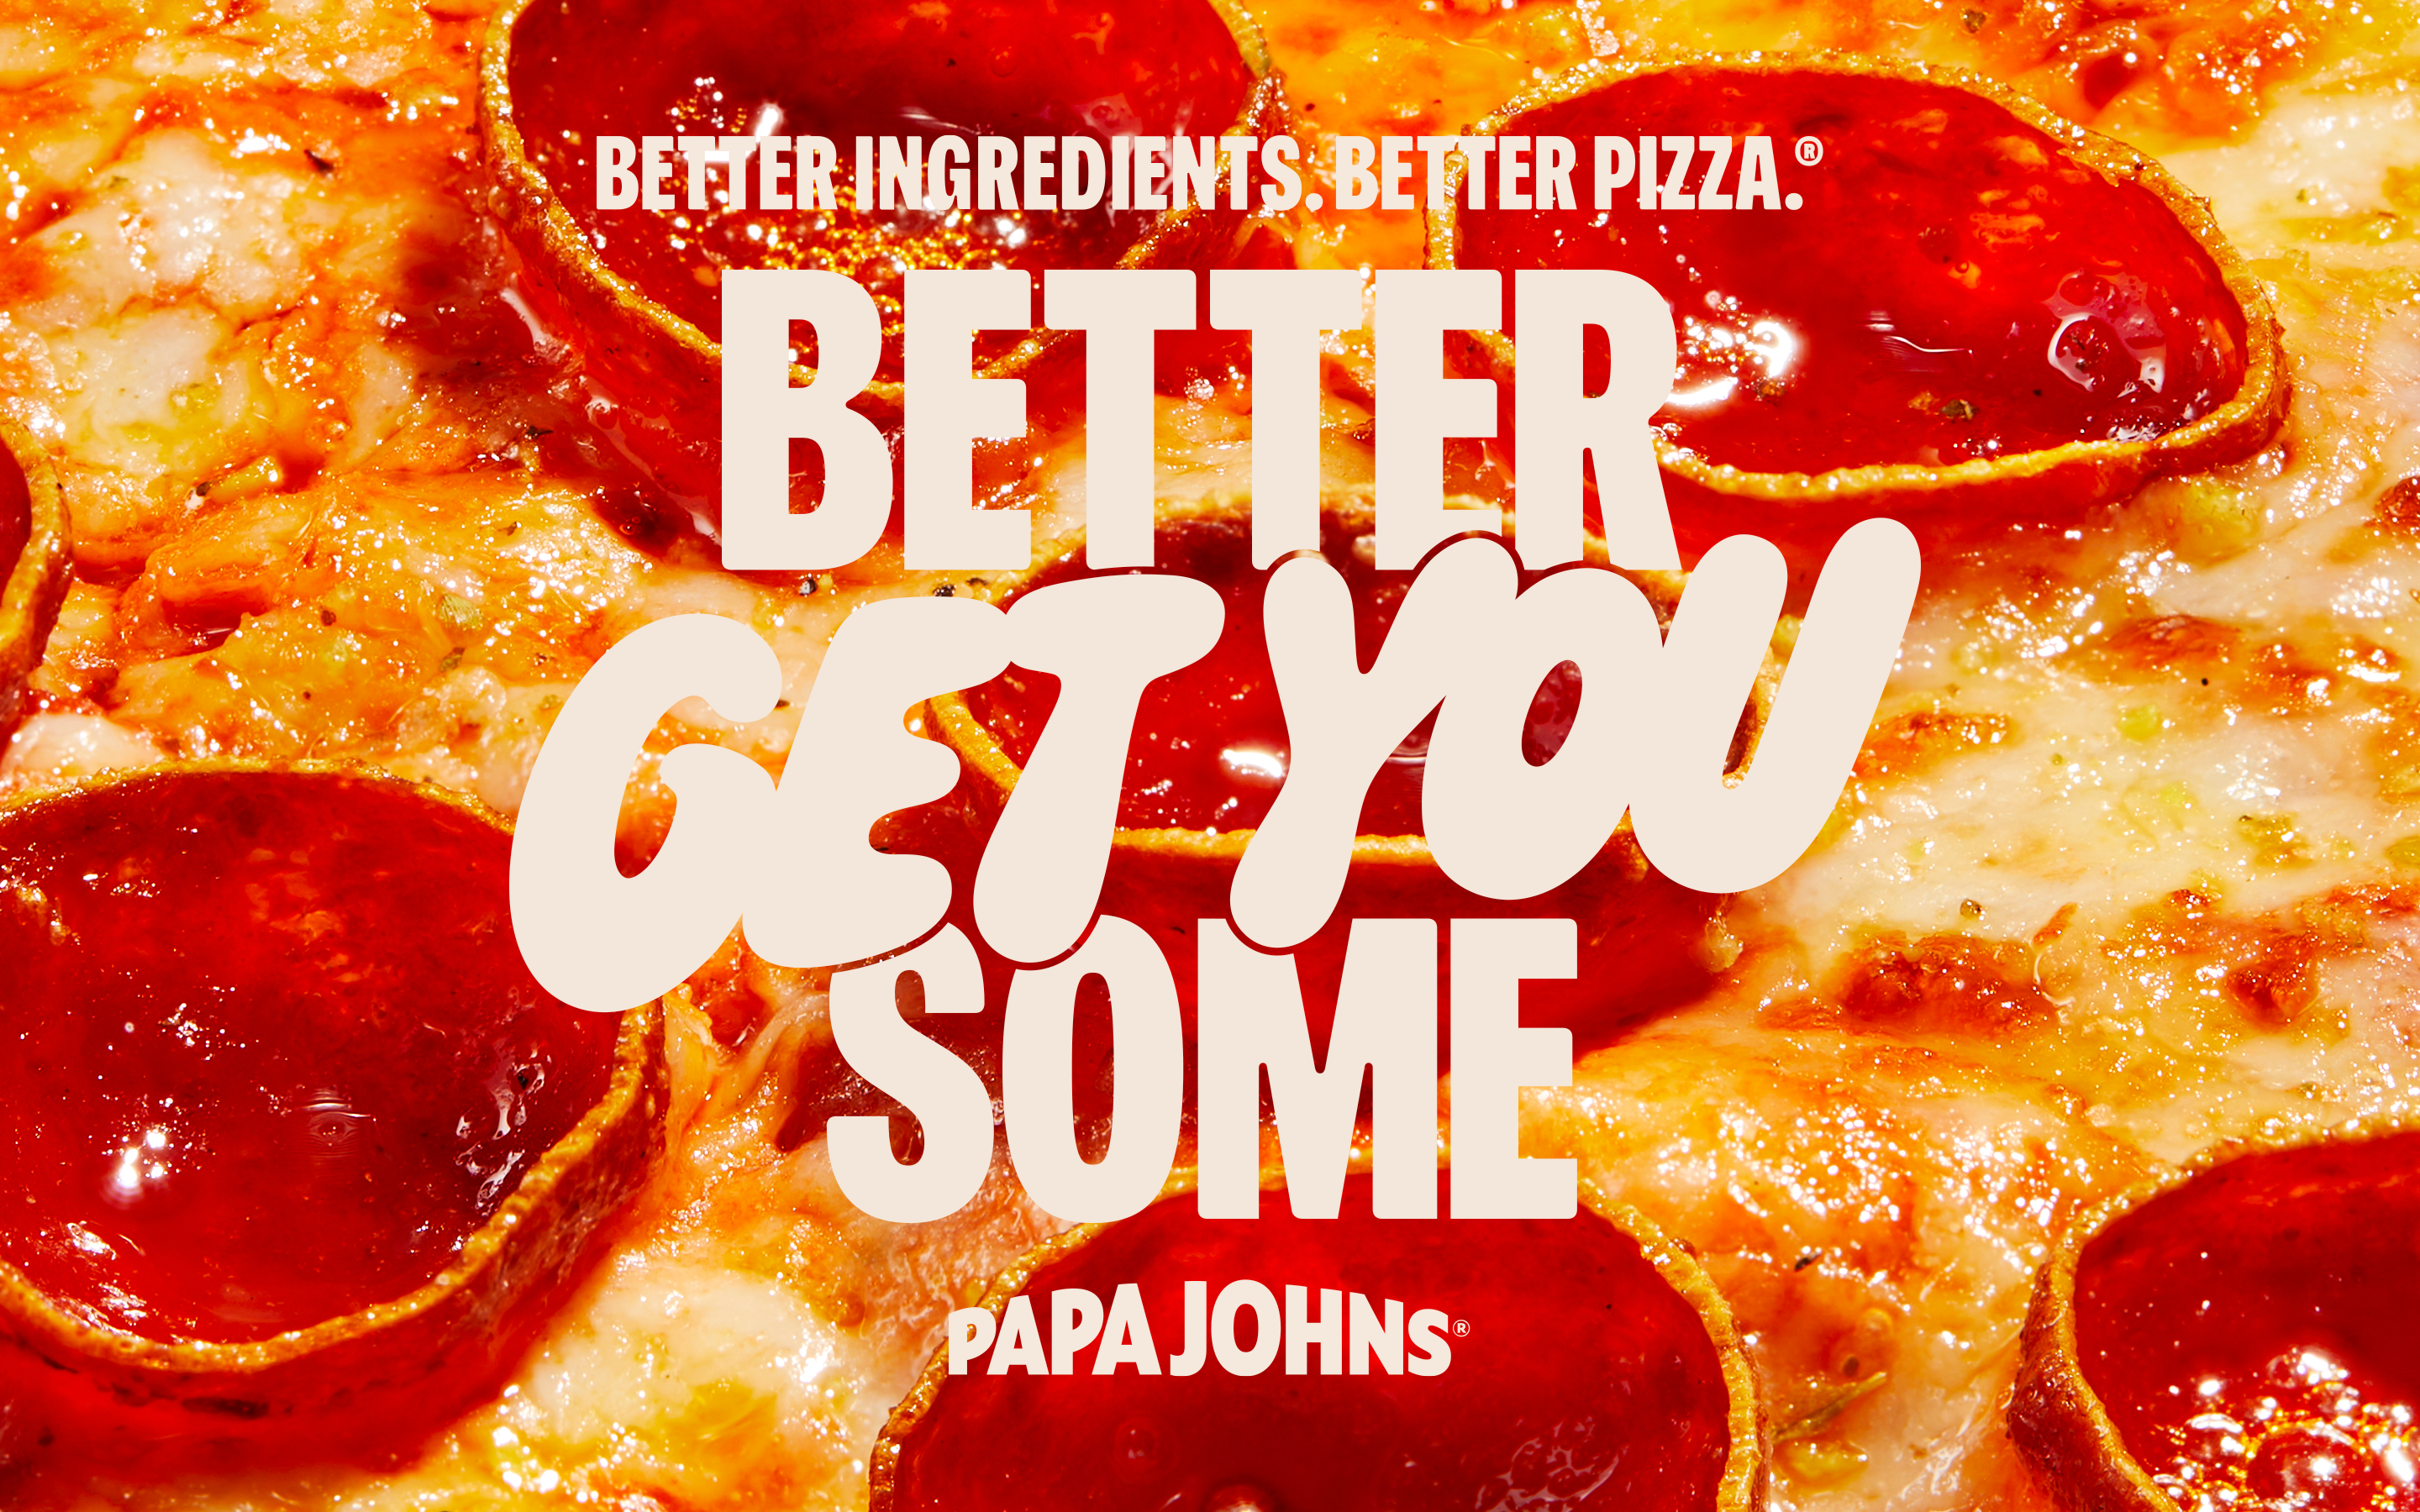 Better Get You Some is the new tagline for Papa Johns. Photo provided by Papa Johns.